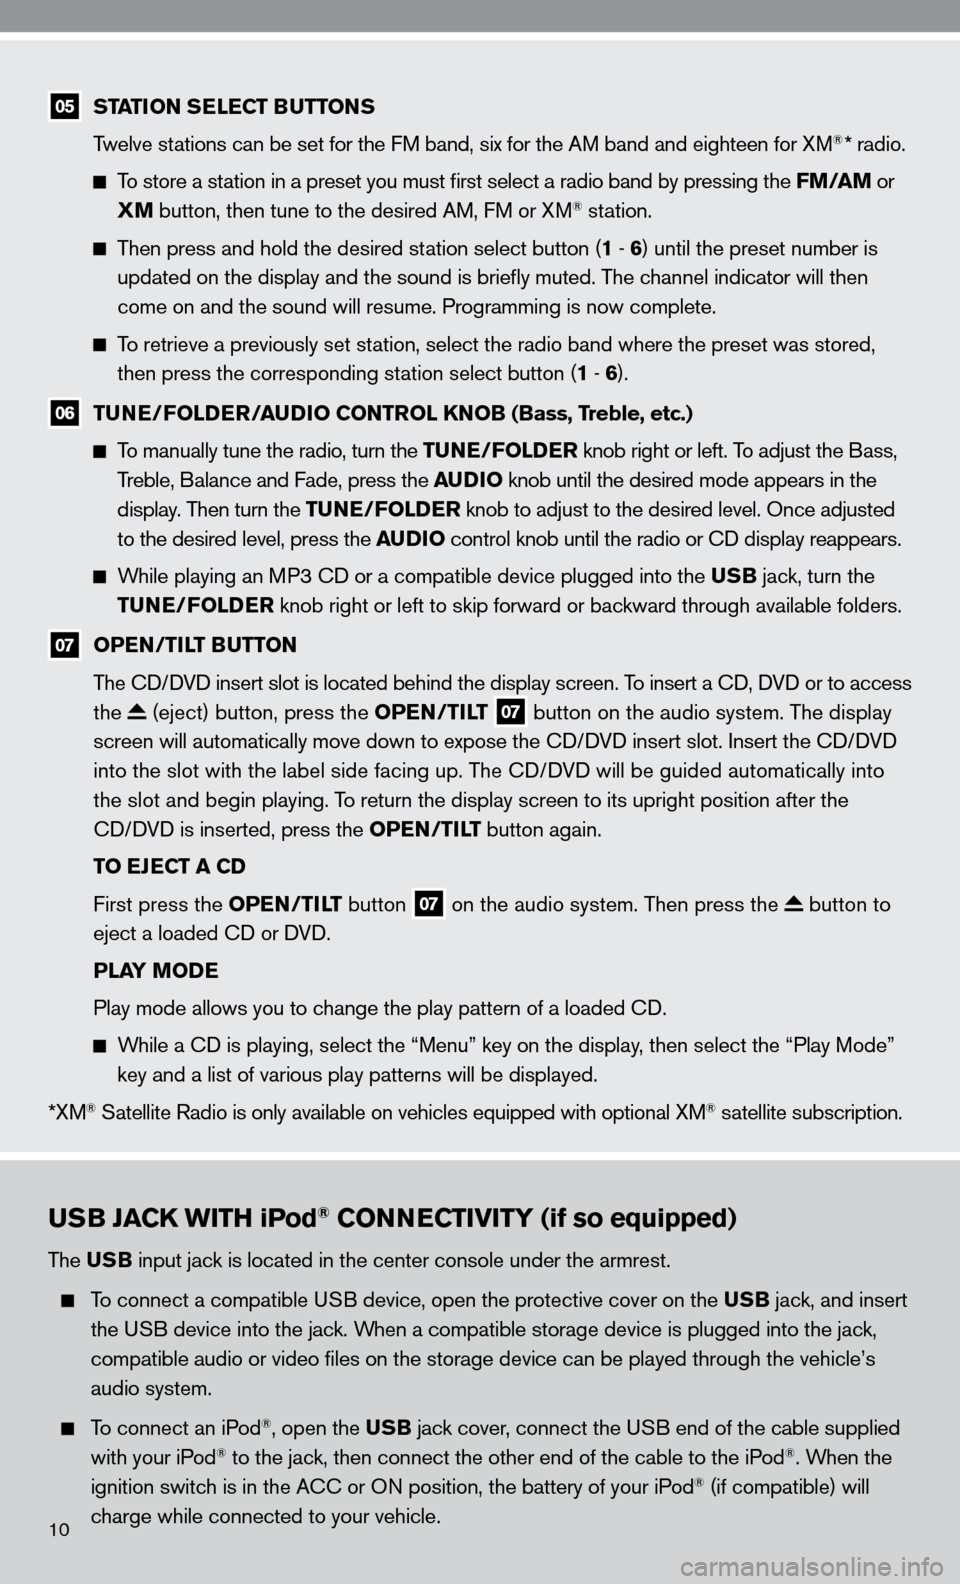 NISSAN ALTIMA HYBRID 2010 L32A / 4.G Quick Reference Guide USB JACK WITH iPod® CONNECTIVITY (if so equipped)
The USB input jack is located in the center console under the armrest.  
 
  To connect a compatible u SB device, open the protective cover on the US